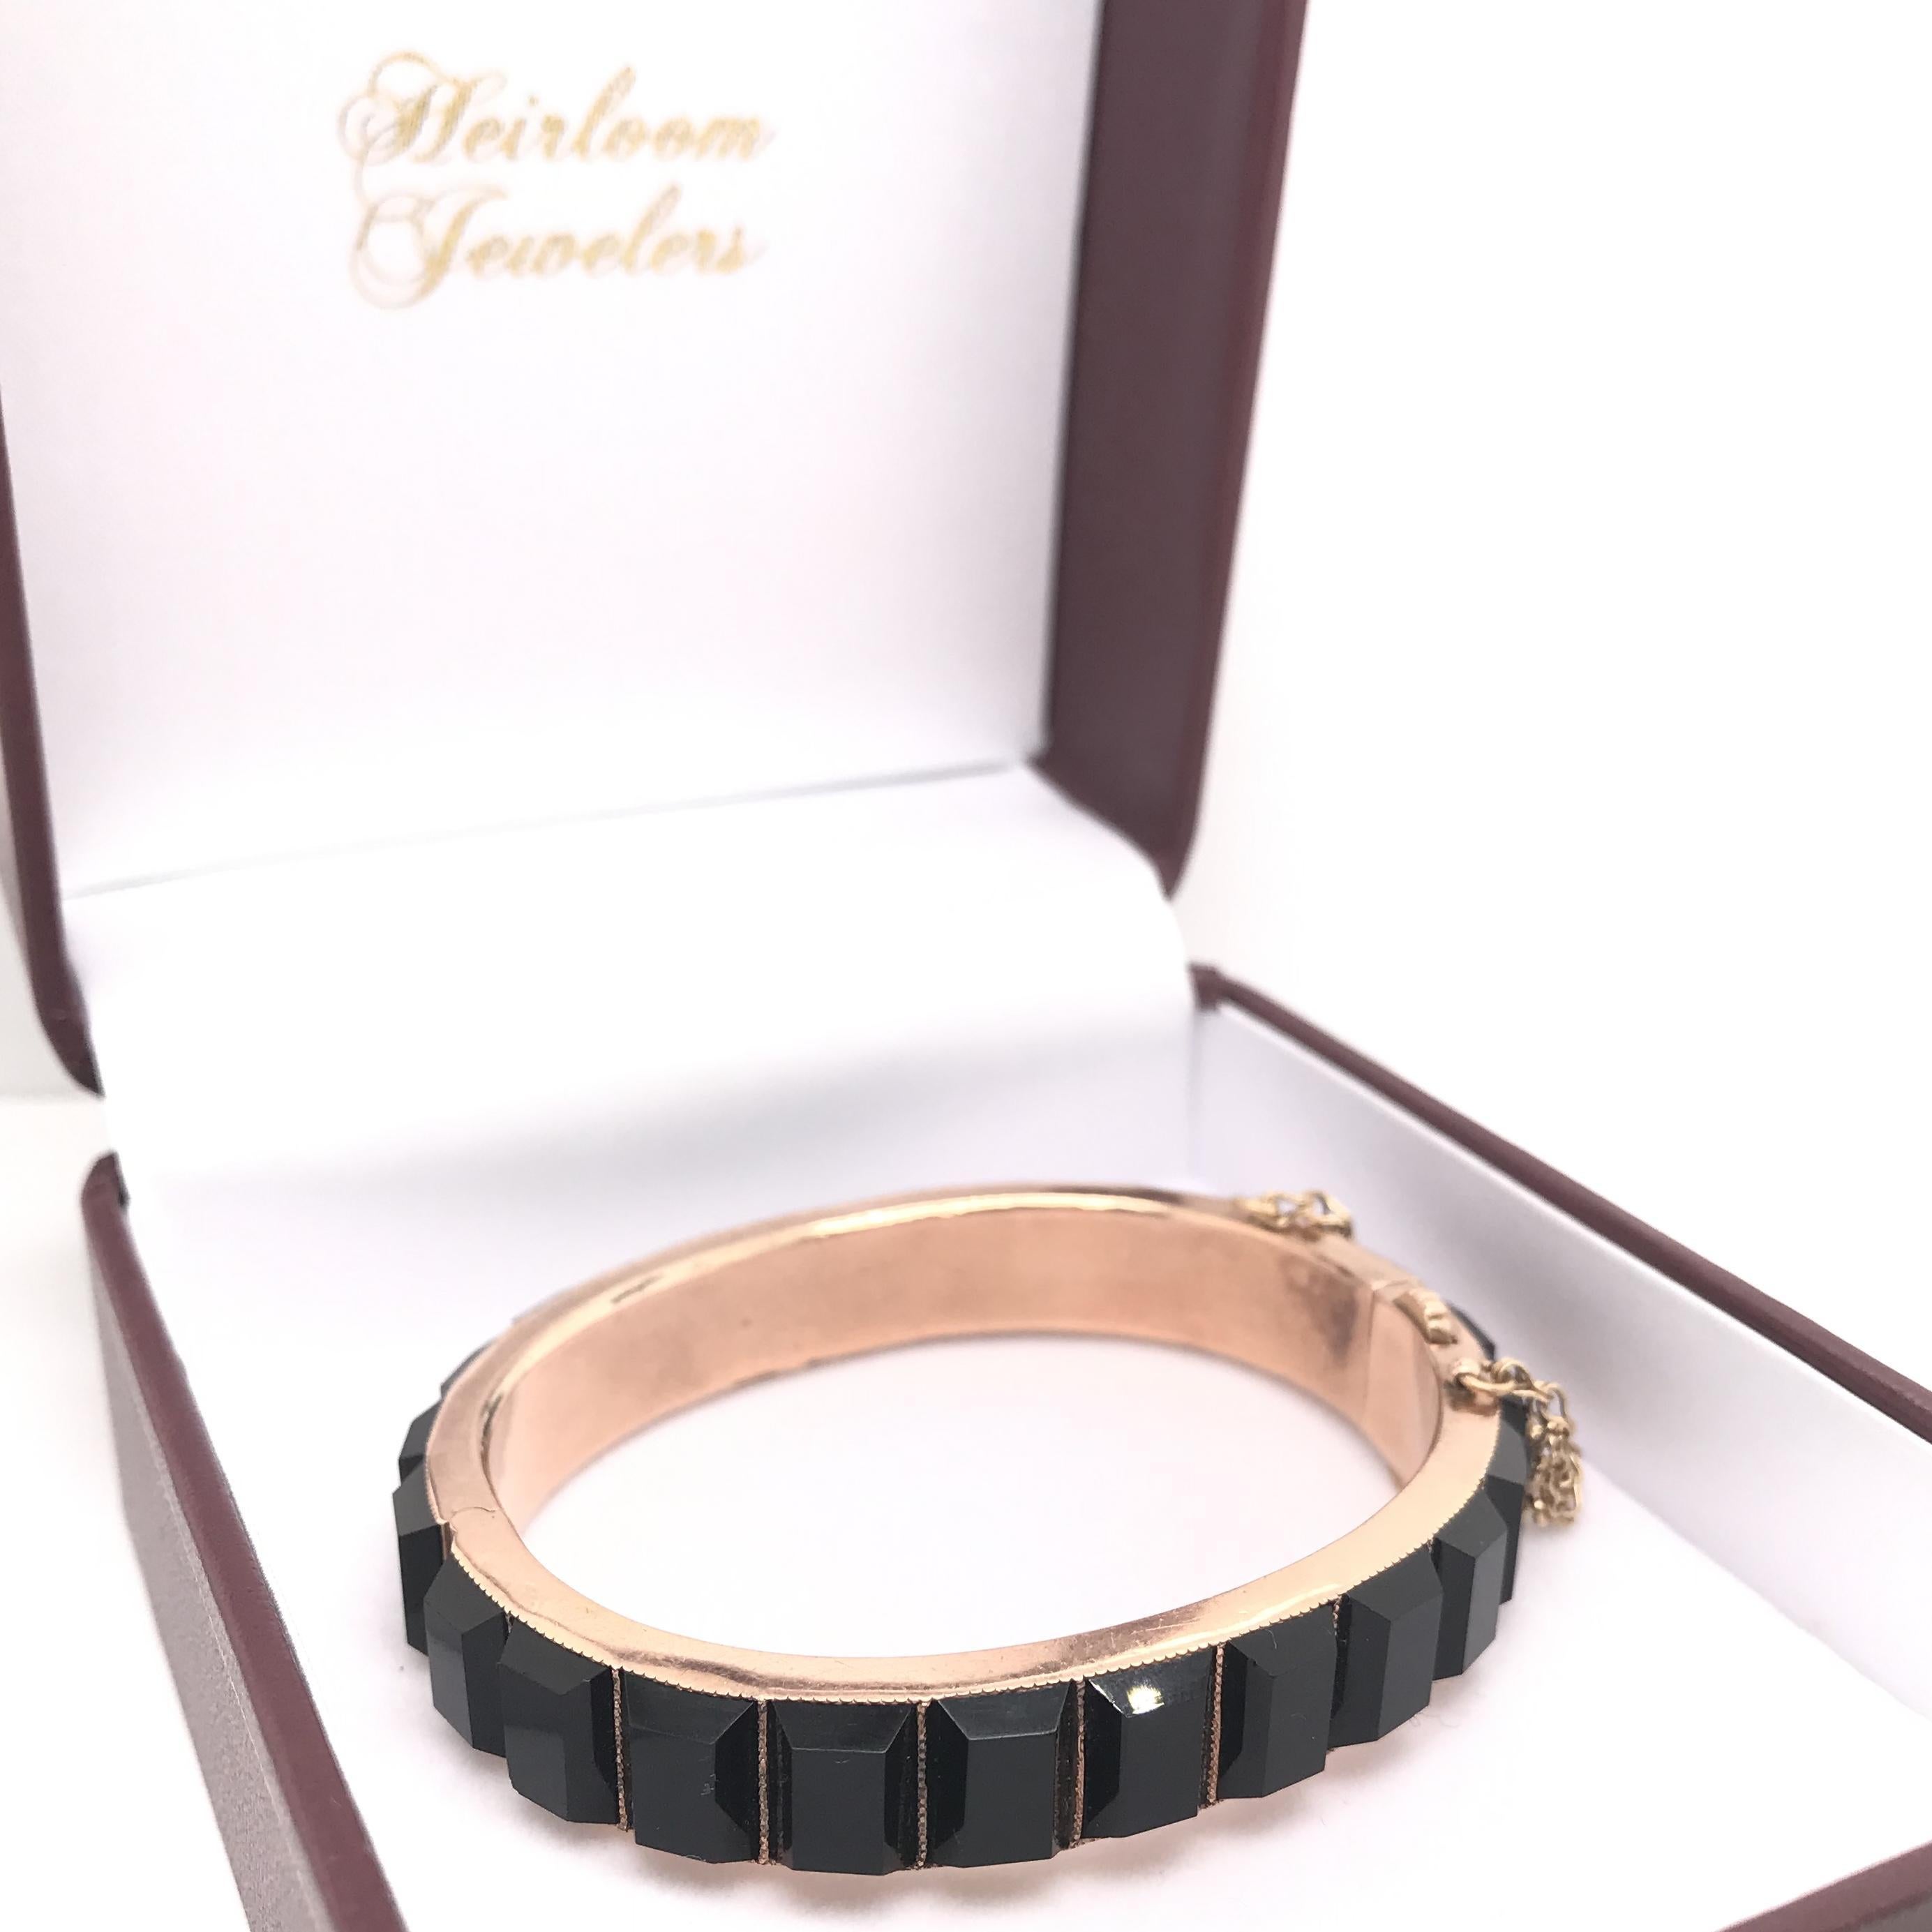 This stunning antique piece was crafted sometime during the Victorian design period (1840-1900). Bold step cut onyx encompass the entire length of the bangle. The setting was crafted from 14K Victorian rose gold. Victorian rose gold is typically a